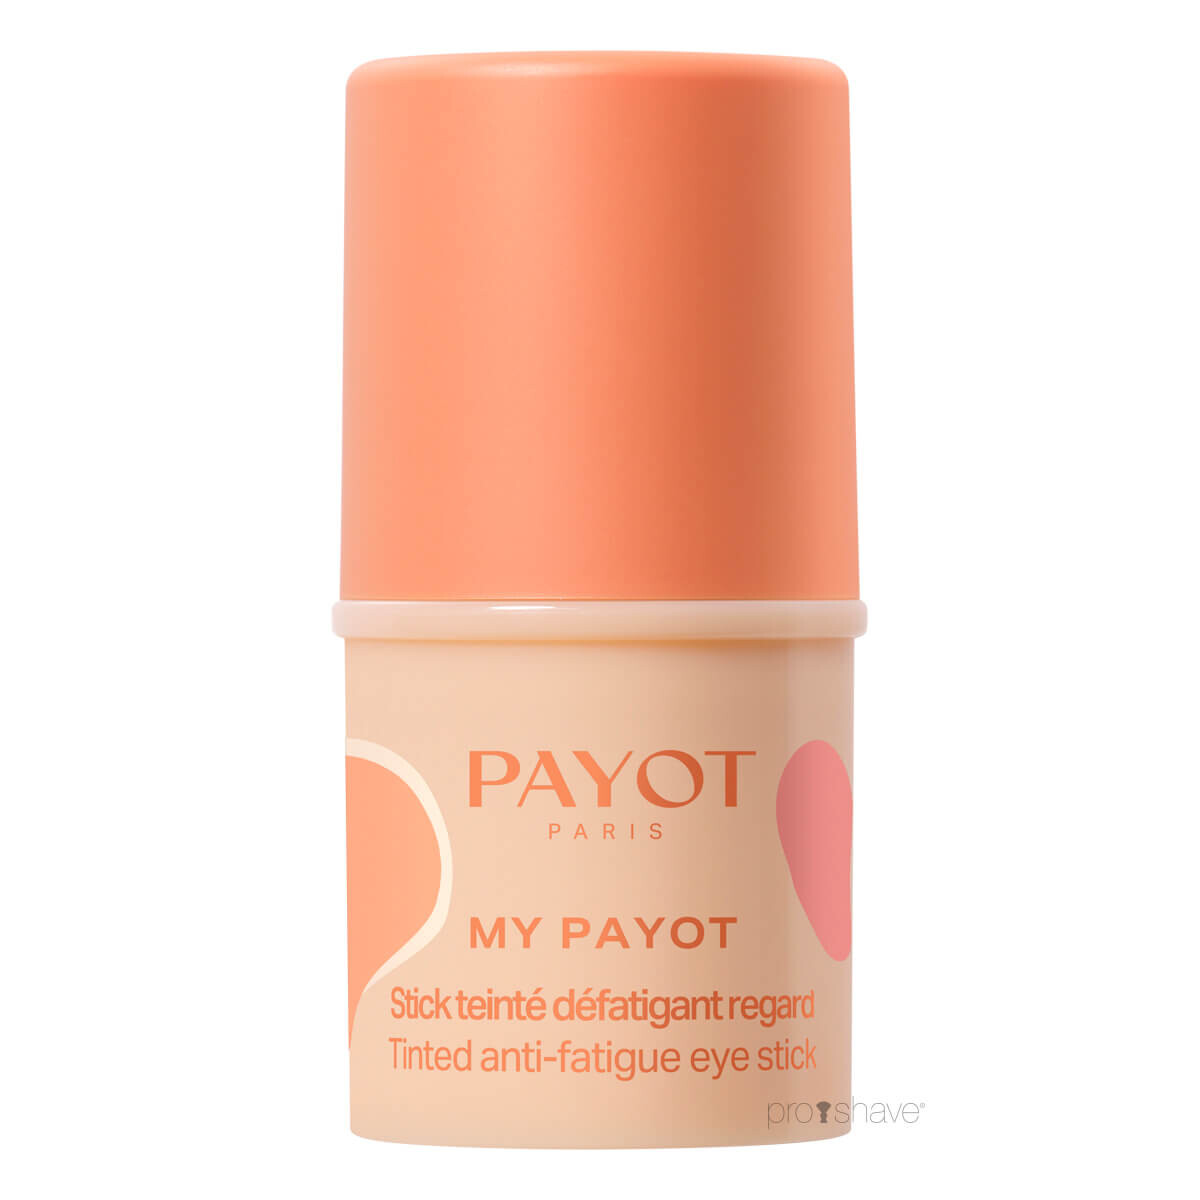 Billede af Payot My Payot Tinted Anti-Fatique Eye Stick, 4.5 ml.